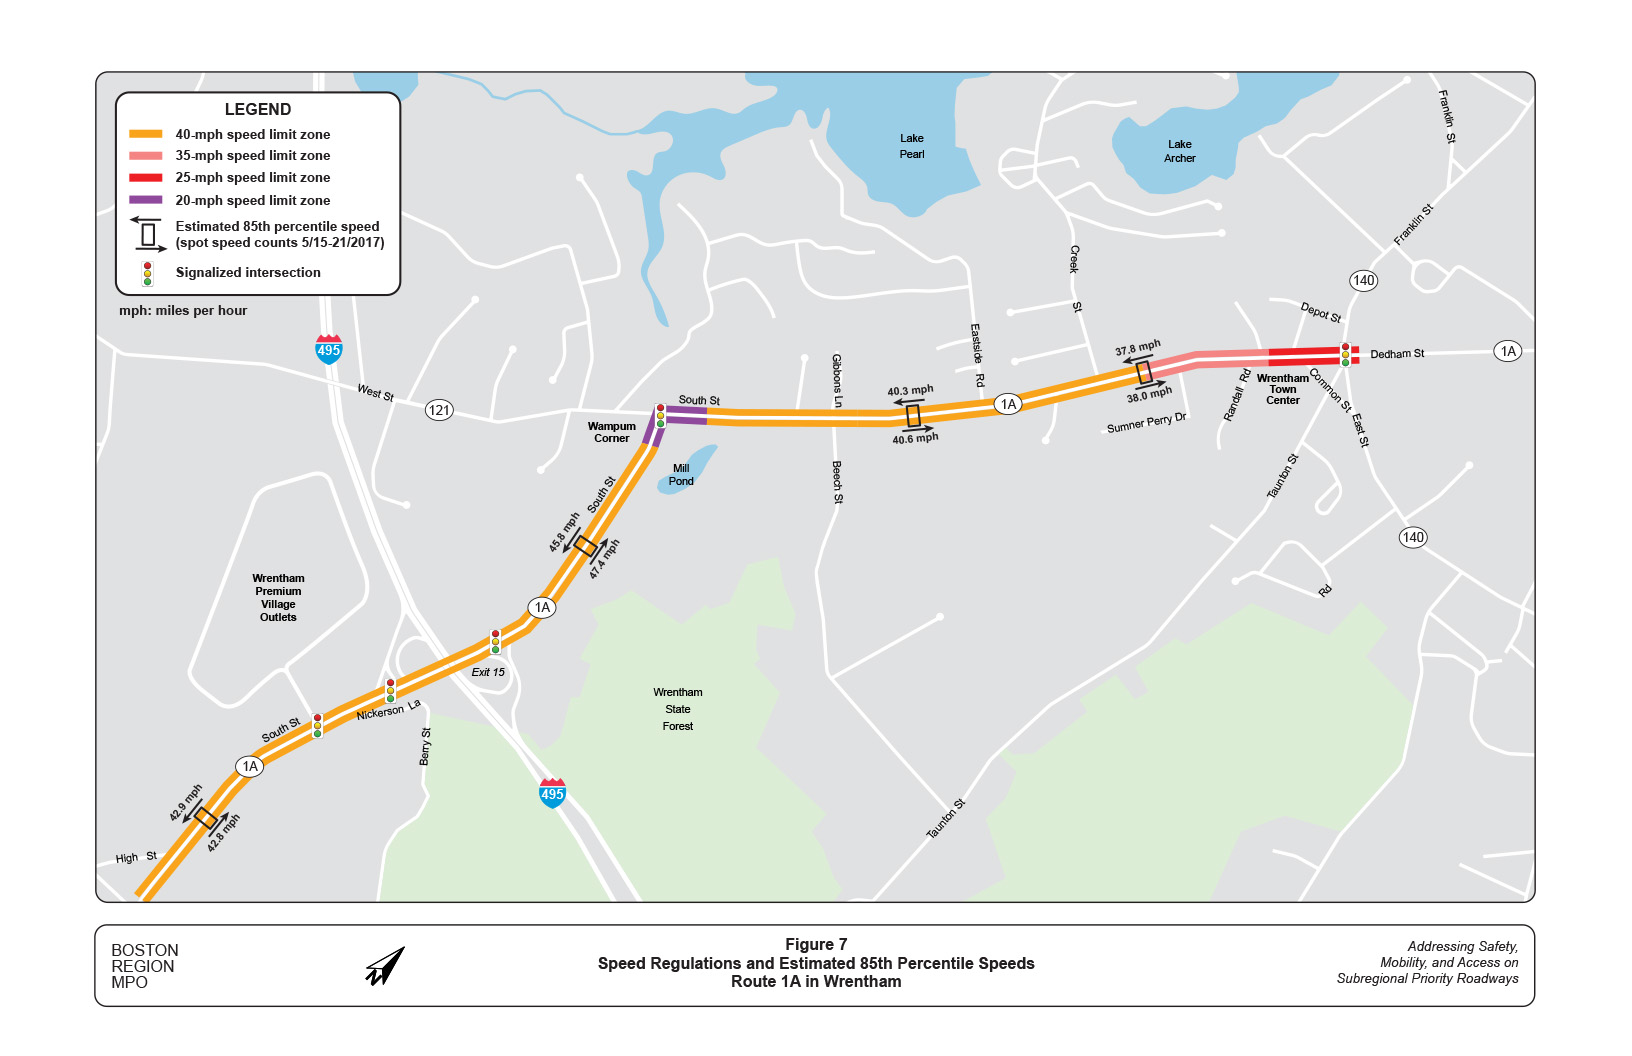 Figure 7 is a map with overlays showing speed regulations and estimated 85th percentile speeds for Route 1A in Wrentham.